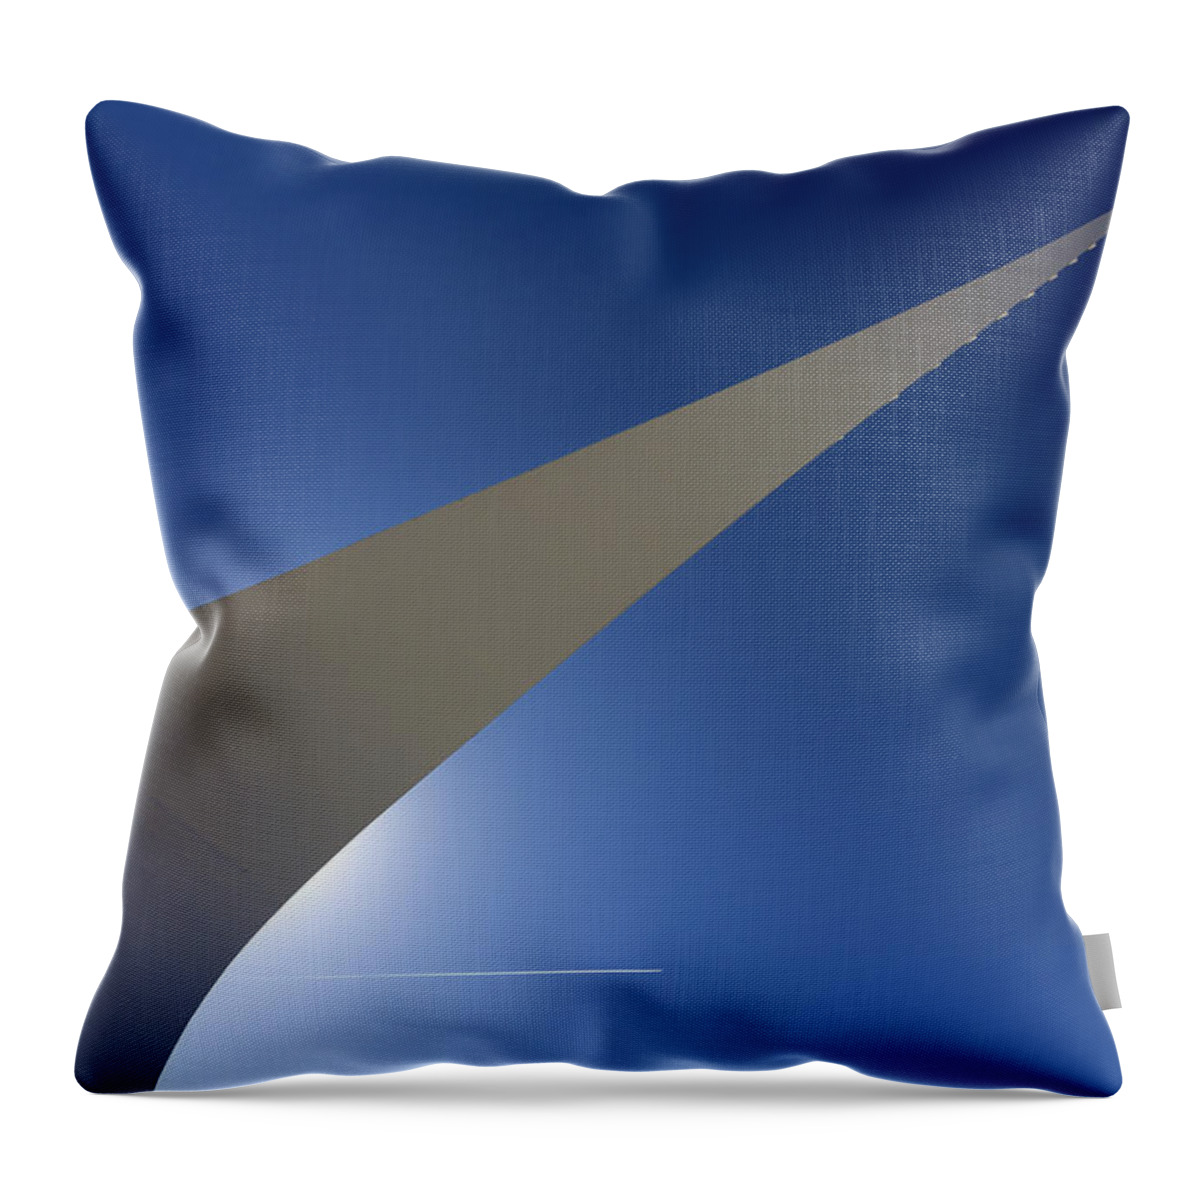 Sundial Throw Pillow featuring the photograph Sundial Bridge And Contrail by Robert Woodward